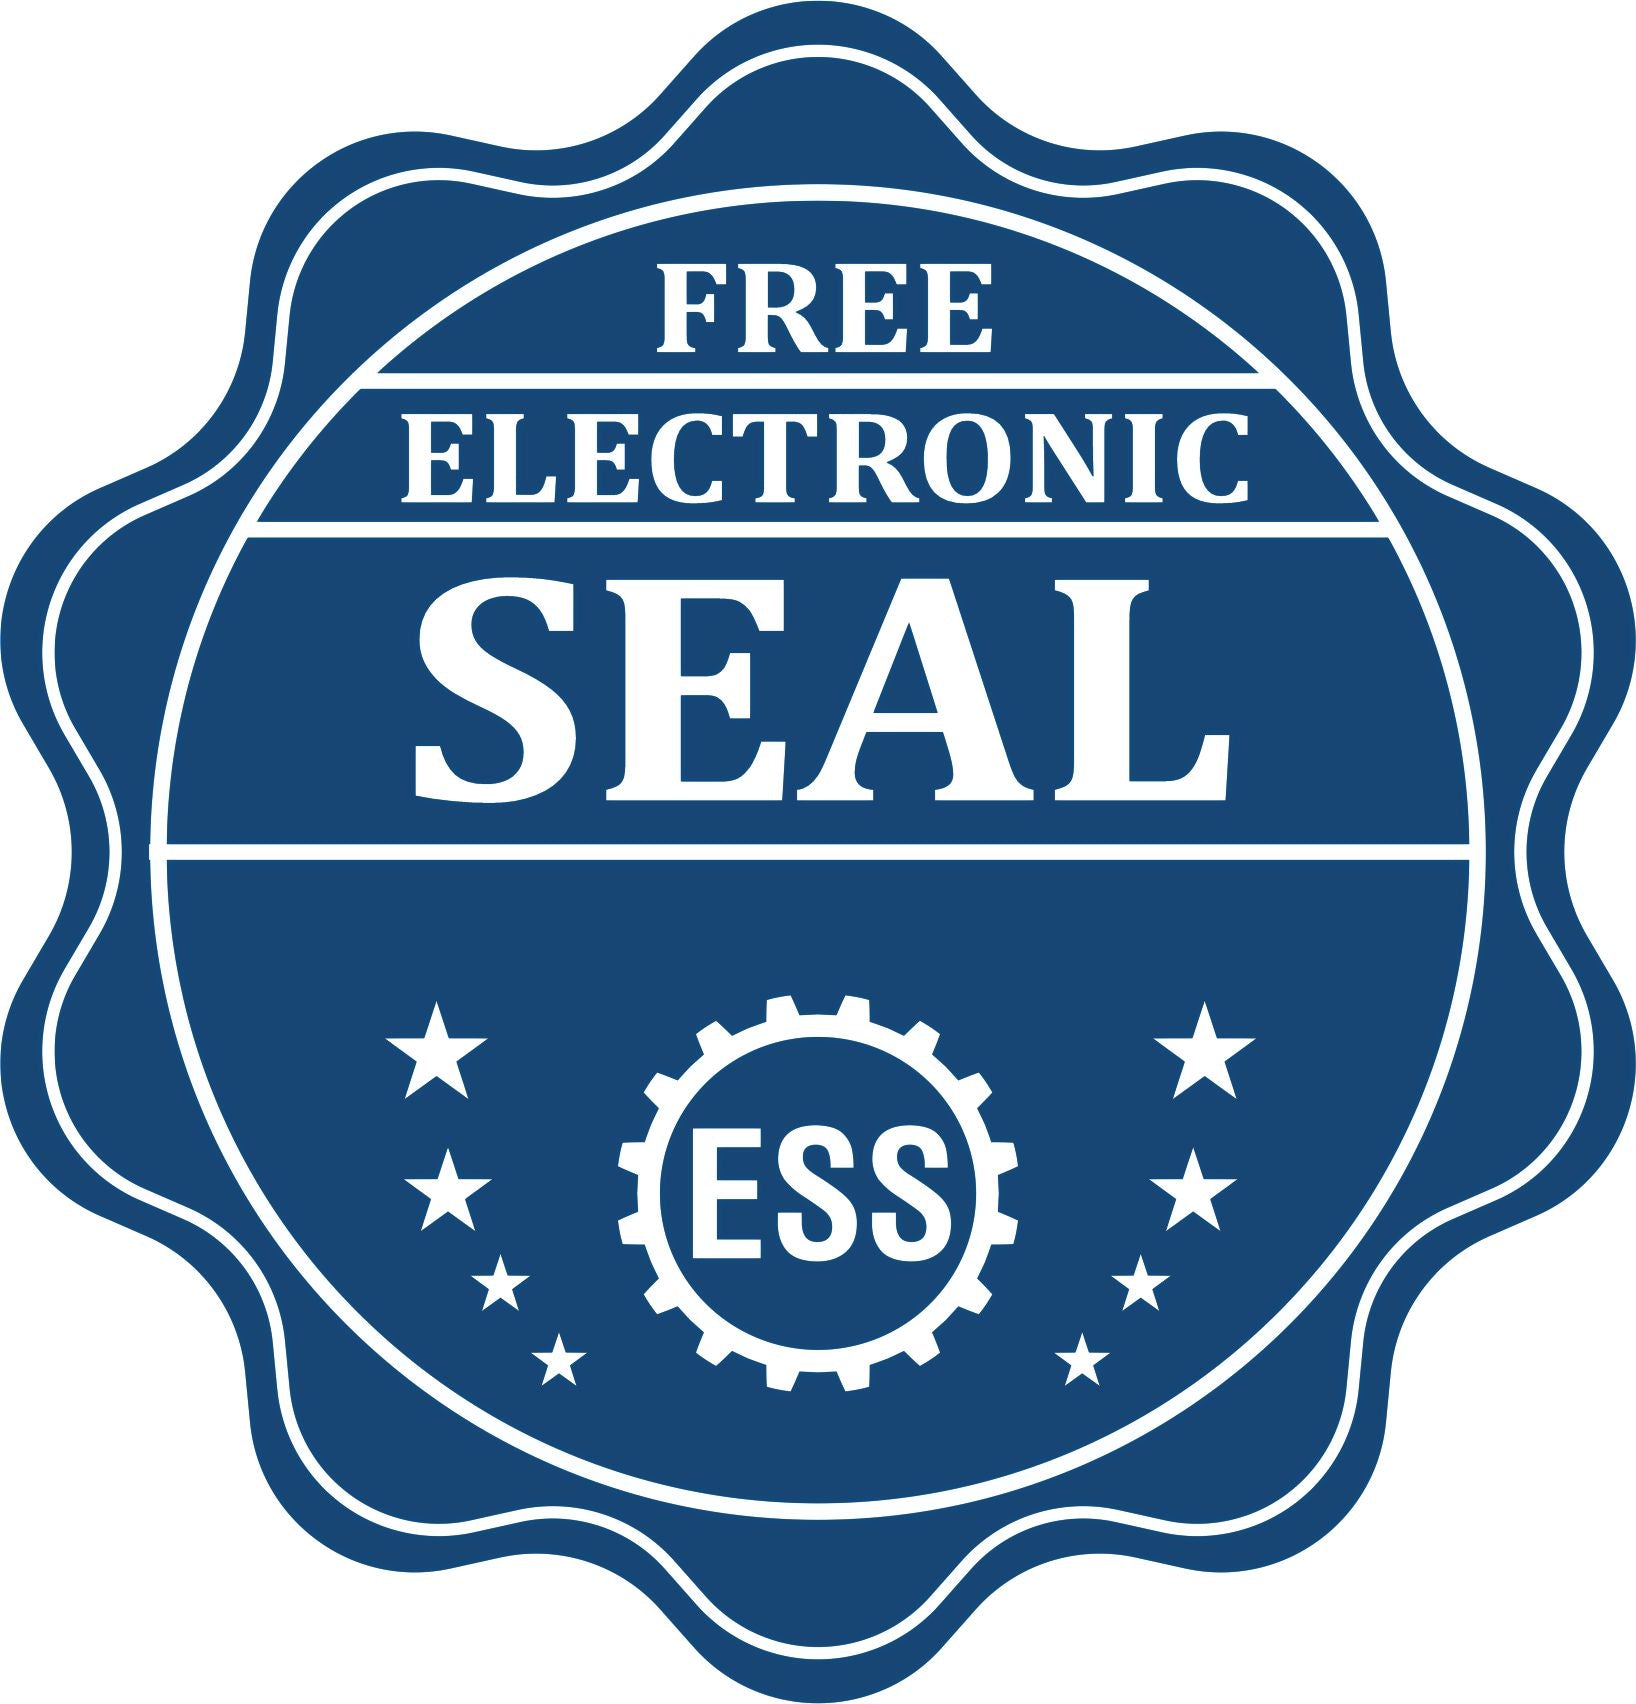 A badge showing a free electronic seal for the Slim Pre-Inked Pennsylvania Professional Geologist Seal Stamp with stars and the ESS gear on the emblem.